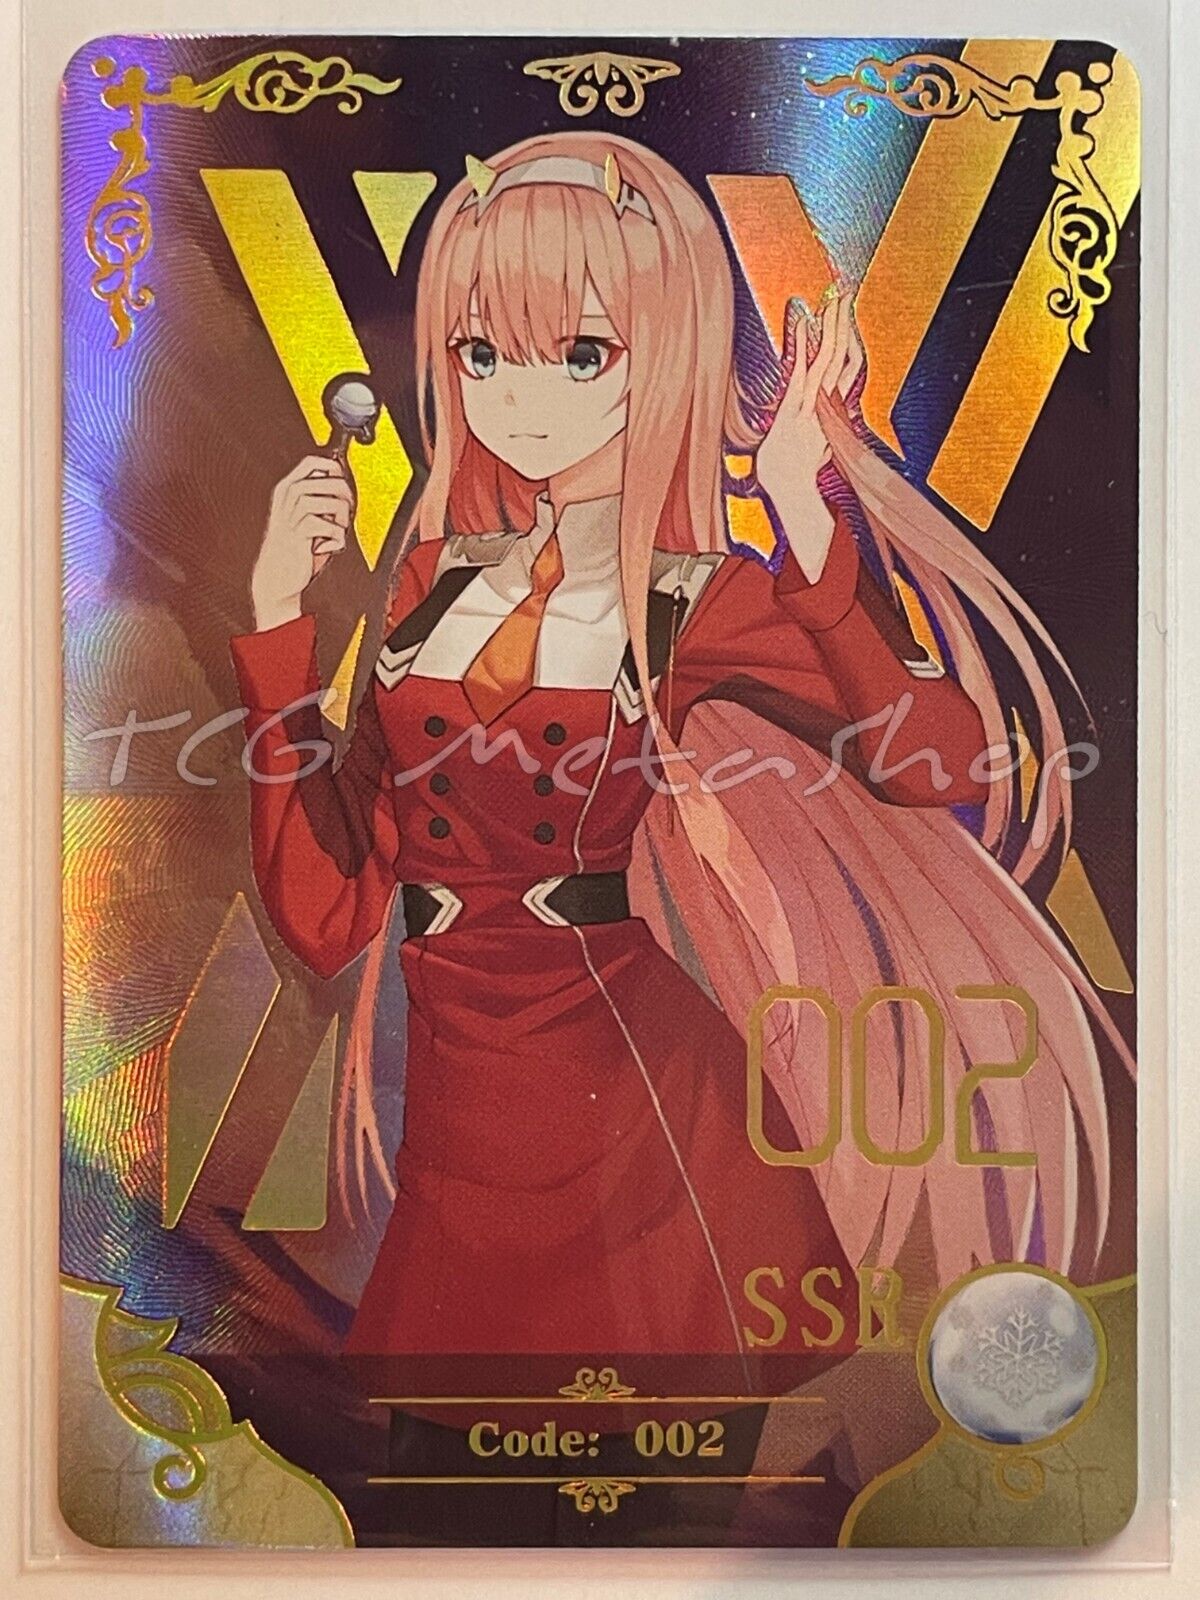 🔥 Zero Two Darling in the Franxx Goddess Story Party Anime Waifu Cards 🔥